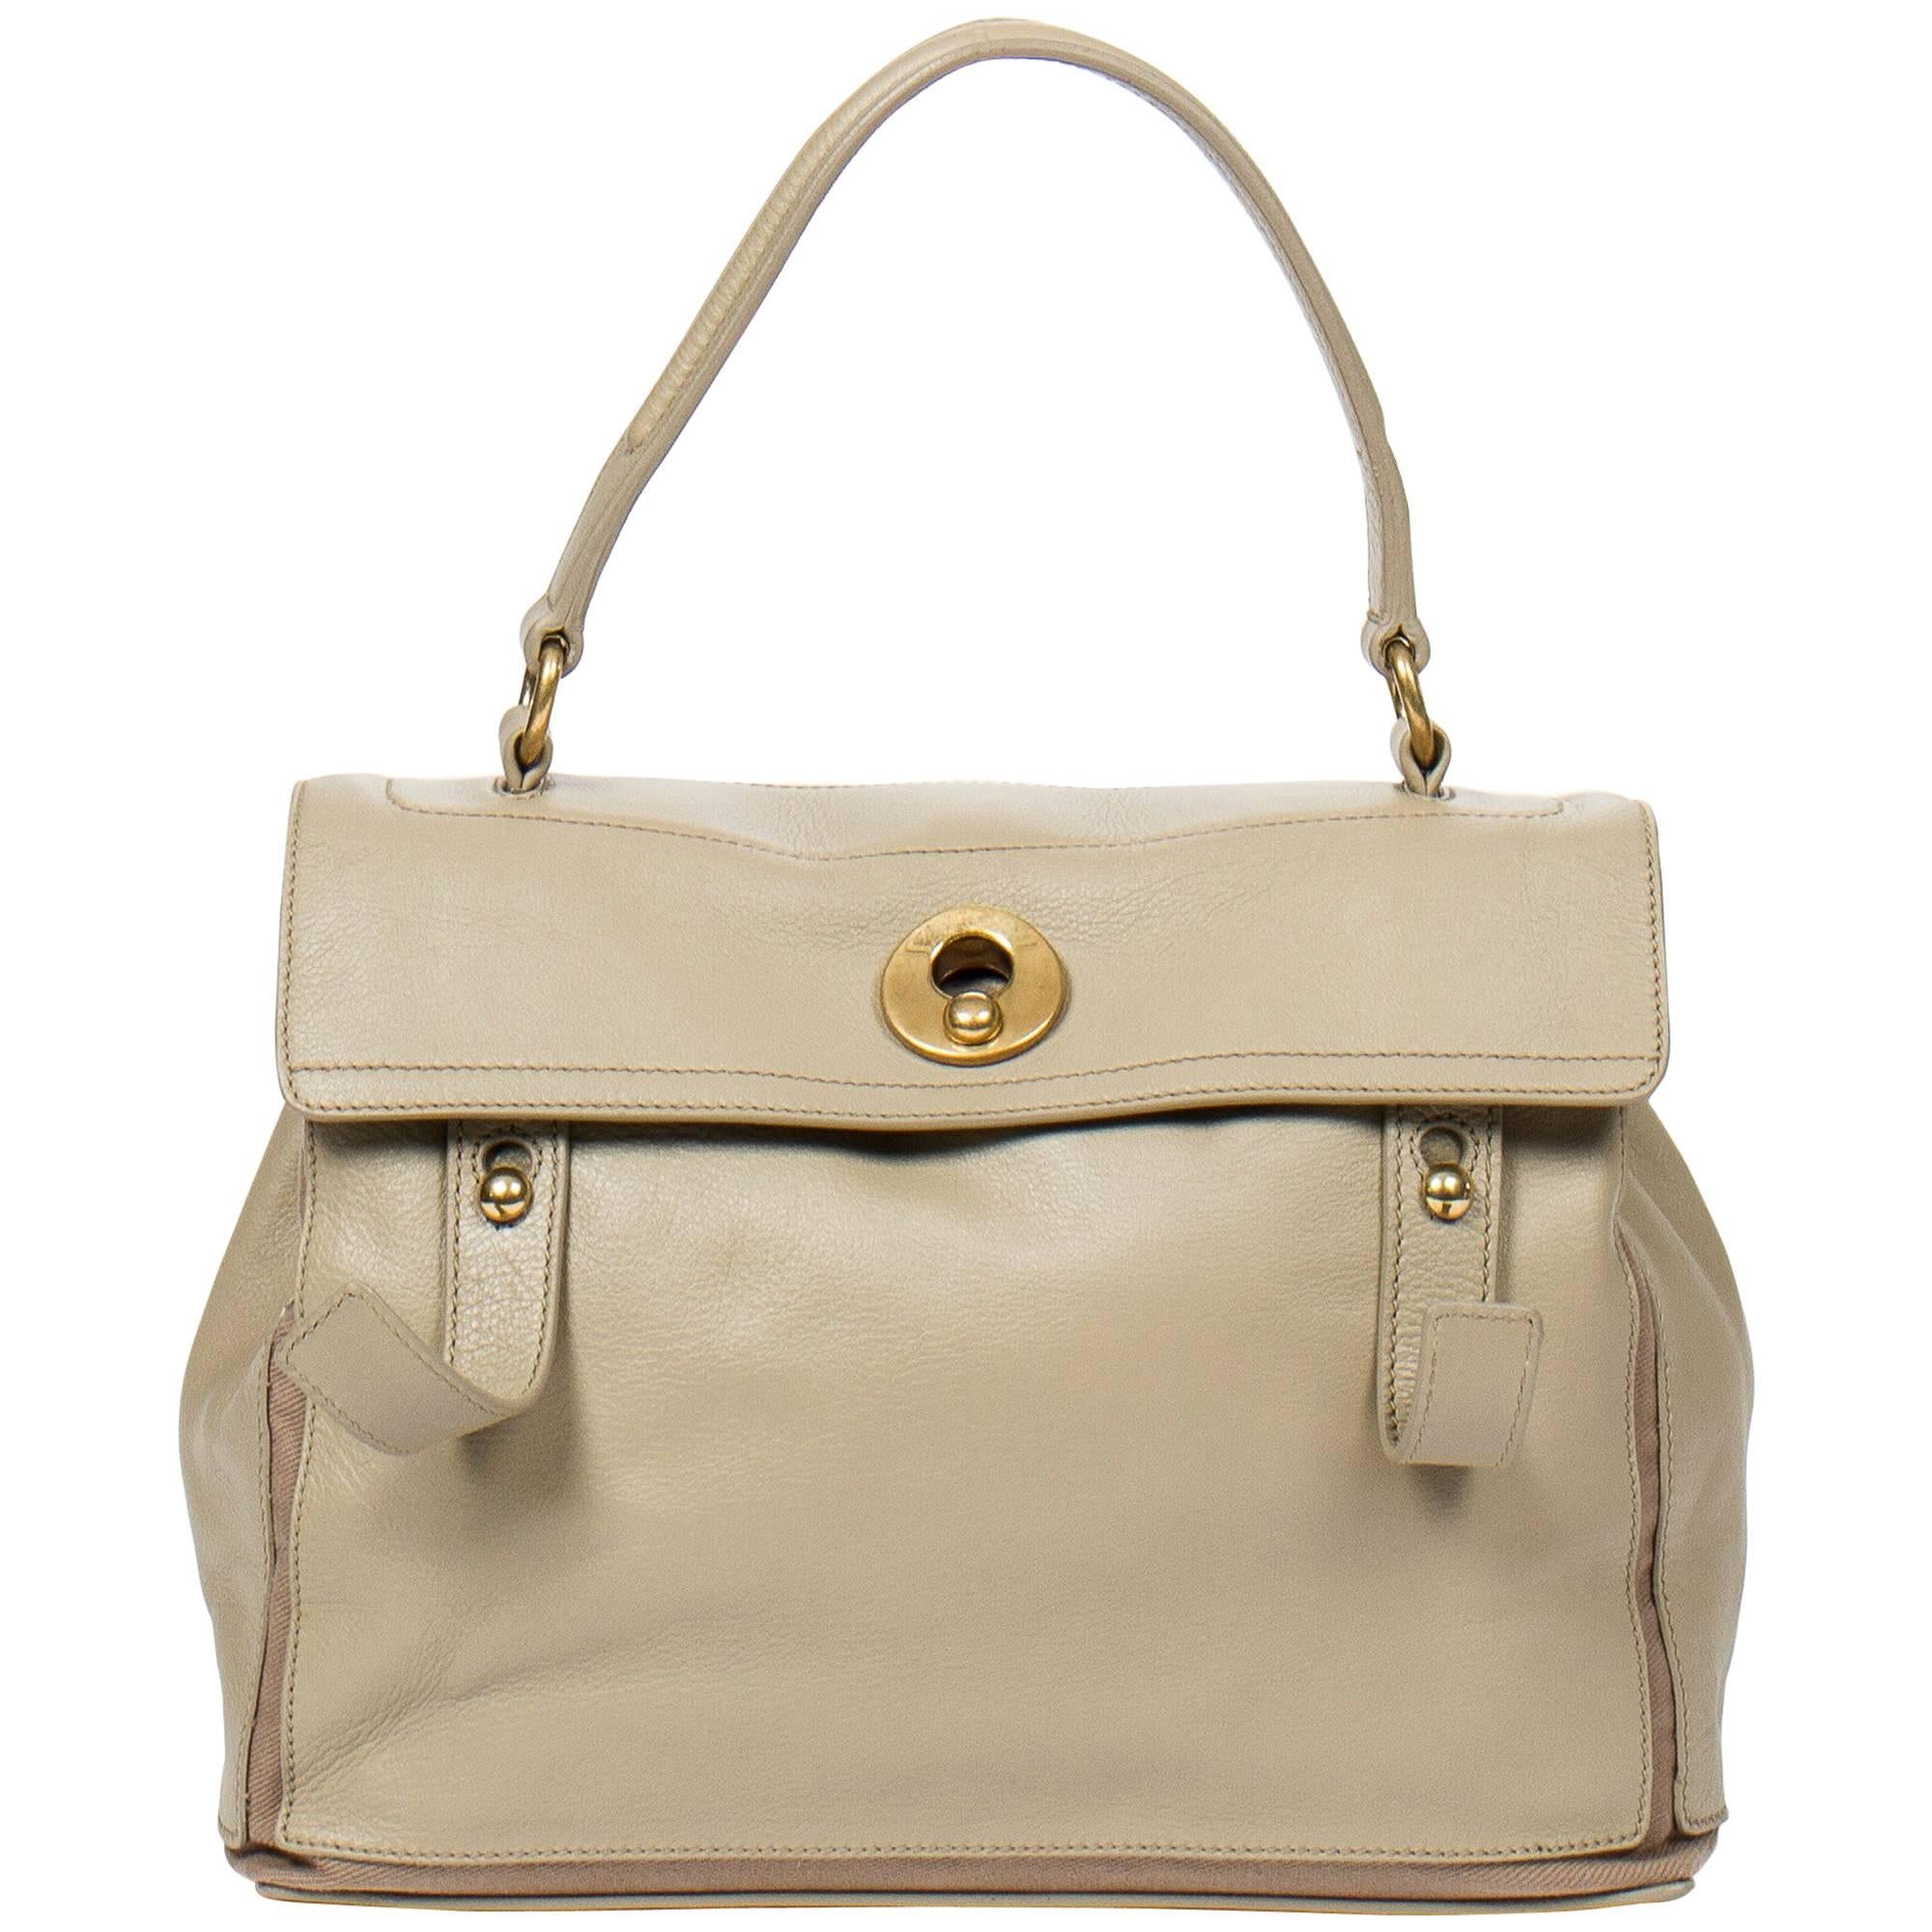 Yves Saint-Laurent Muse 2 MM in light grey grained leather